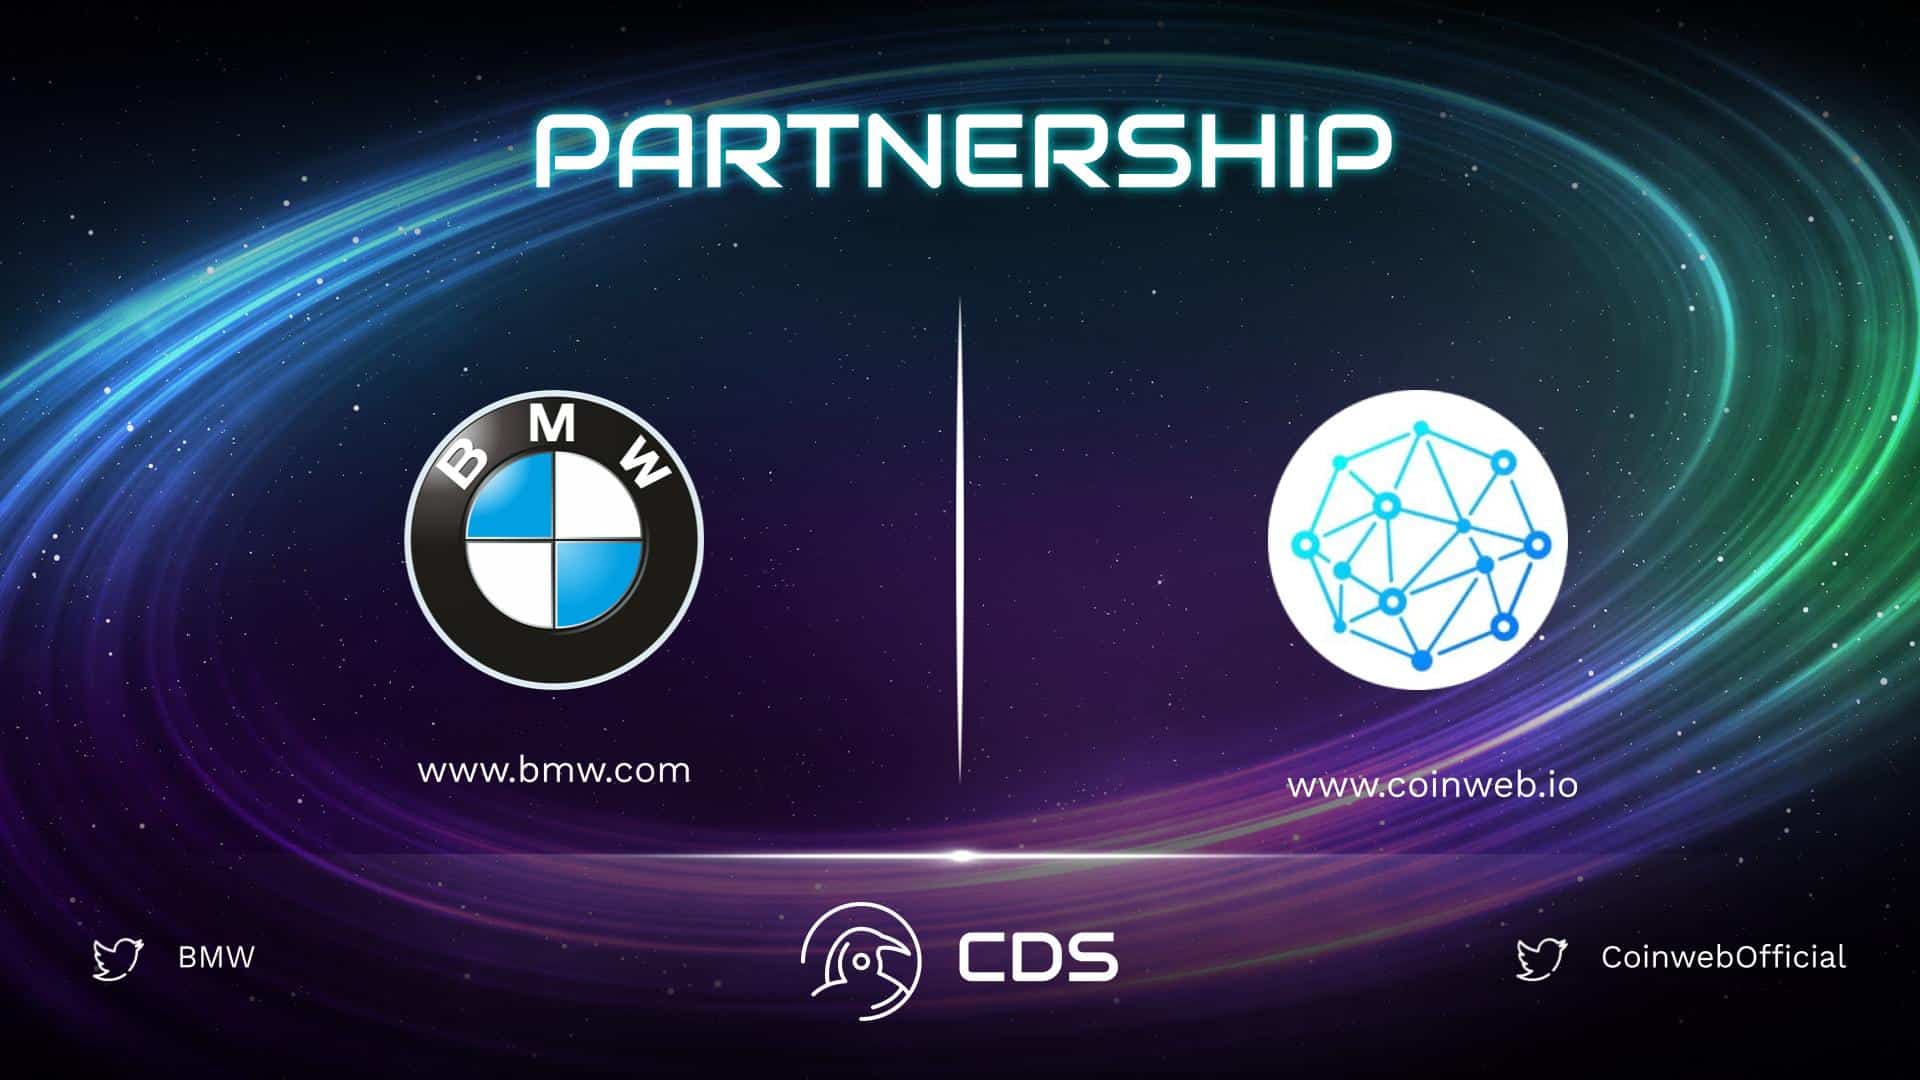 BMW Partners With Coinweb and BNB Chain for Blockchain Loyalty Program